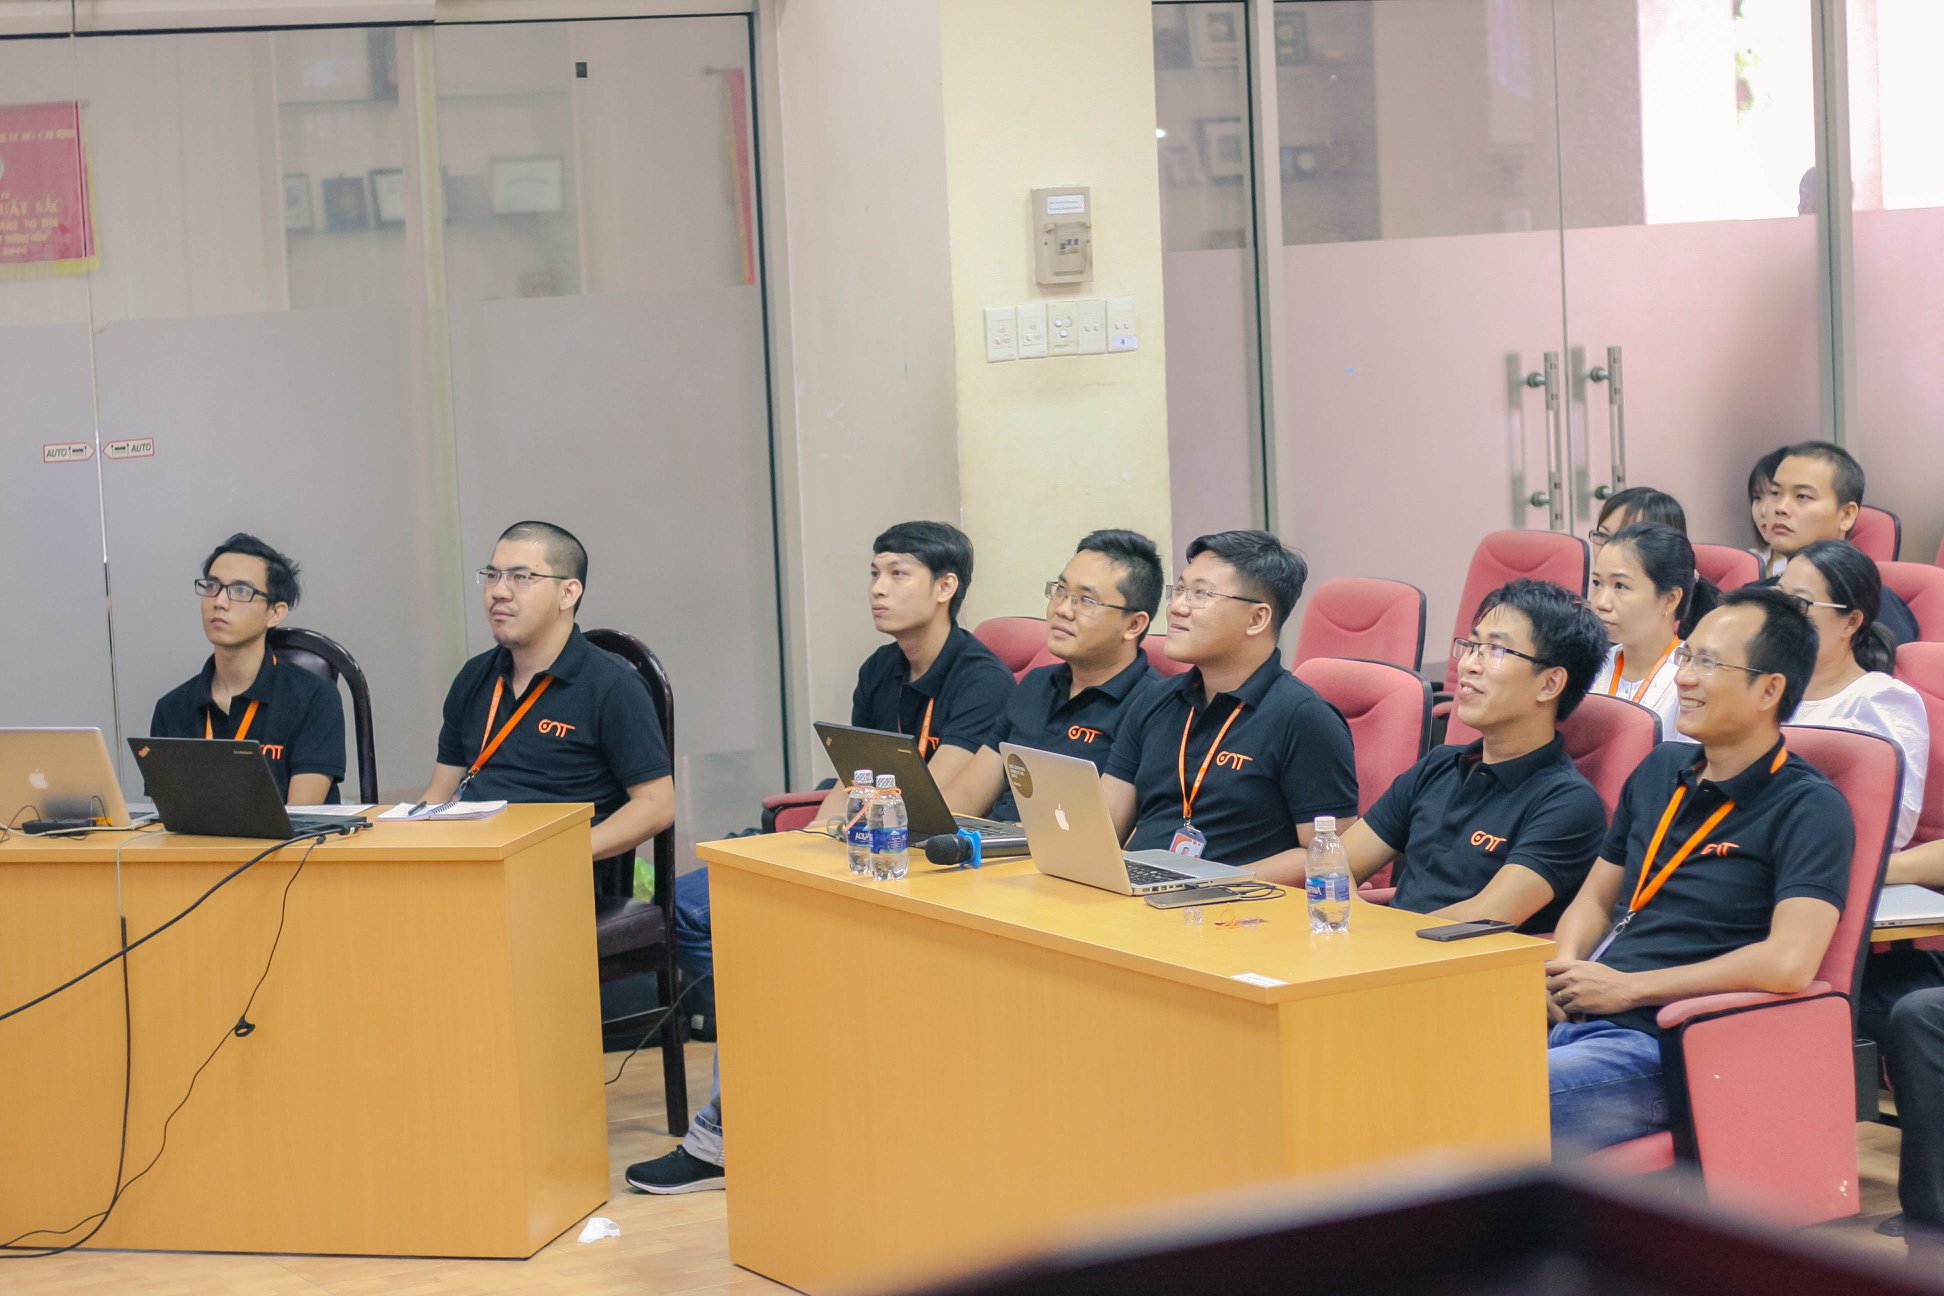 GNT's management and technical team attentively watched the seminar